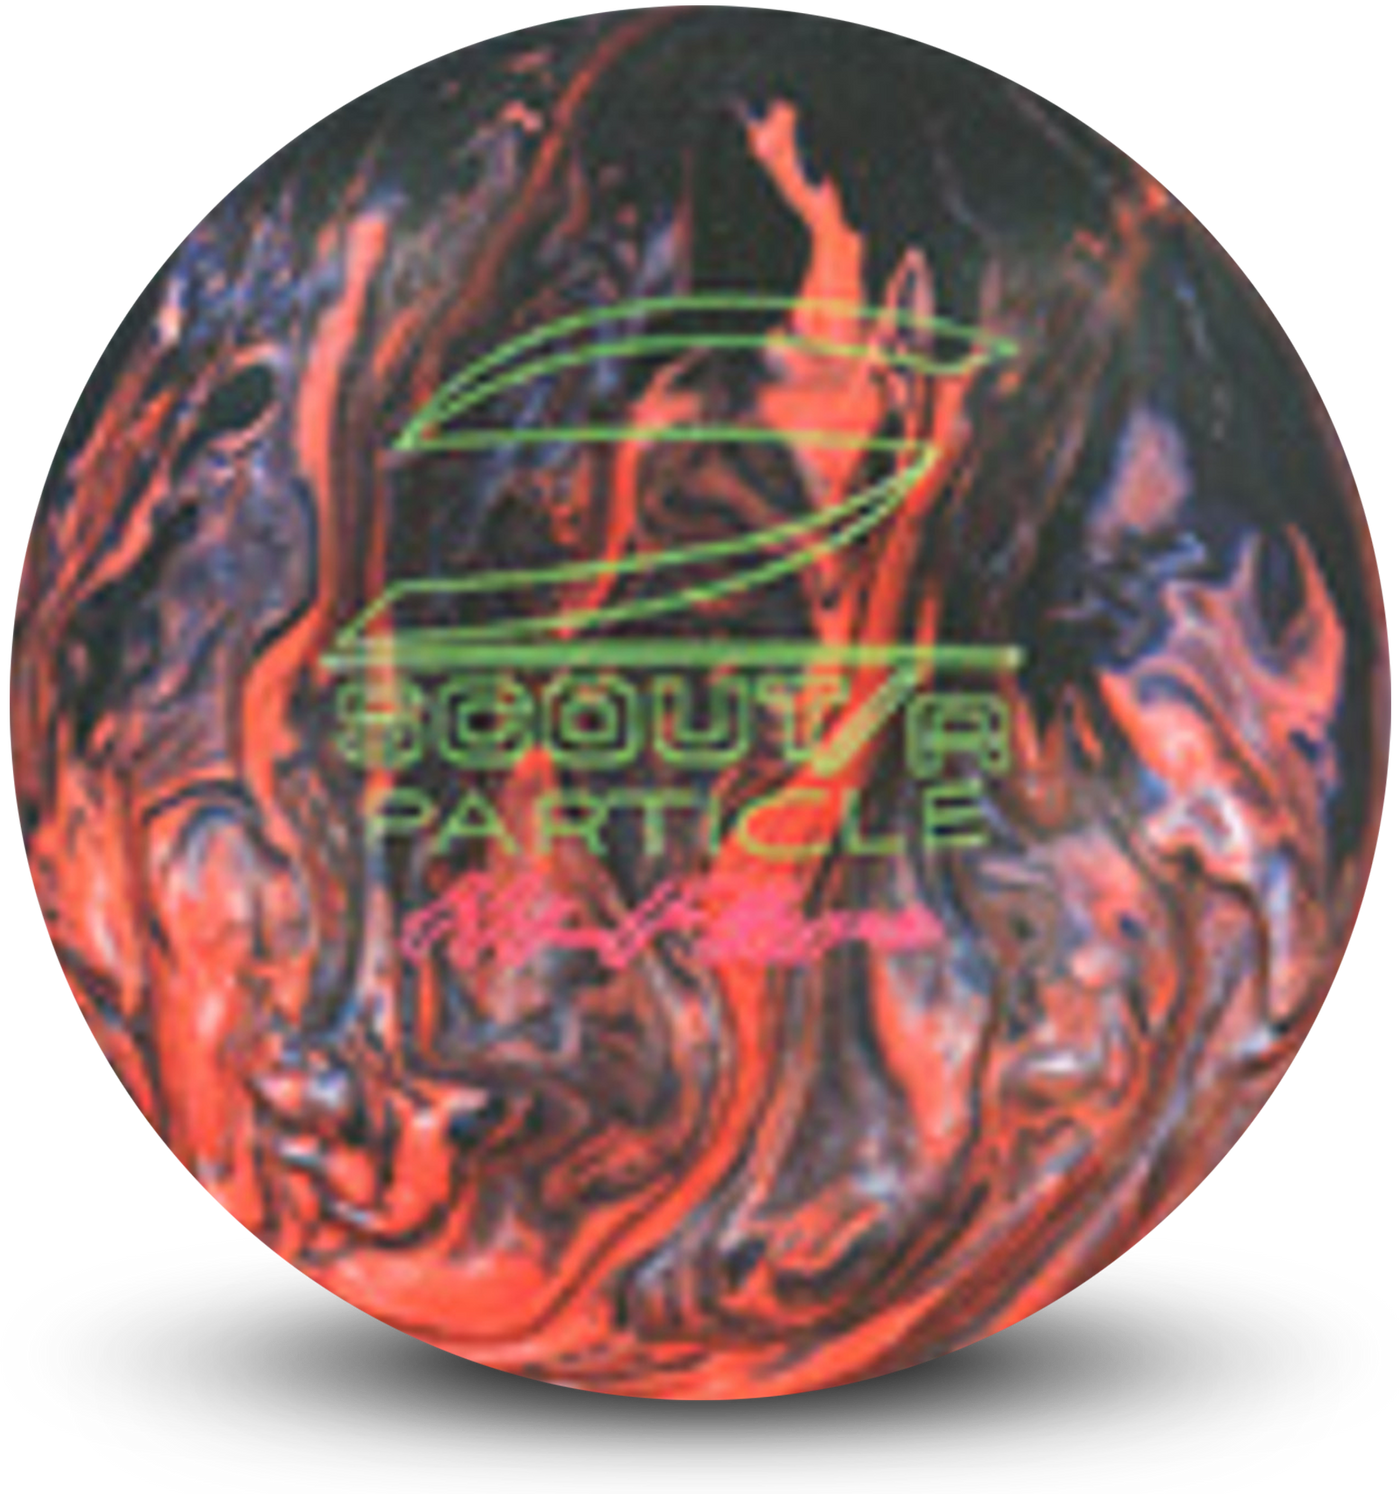 Scout/R Particle Hi-Flare Bowling Ball